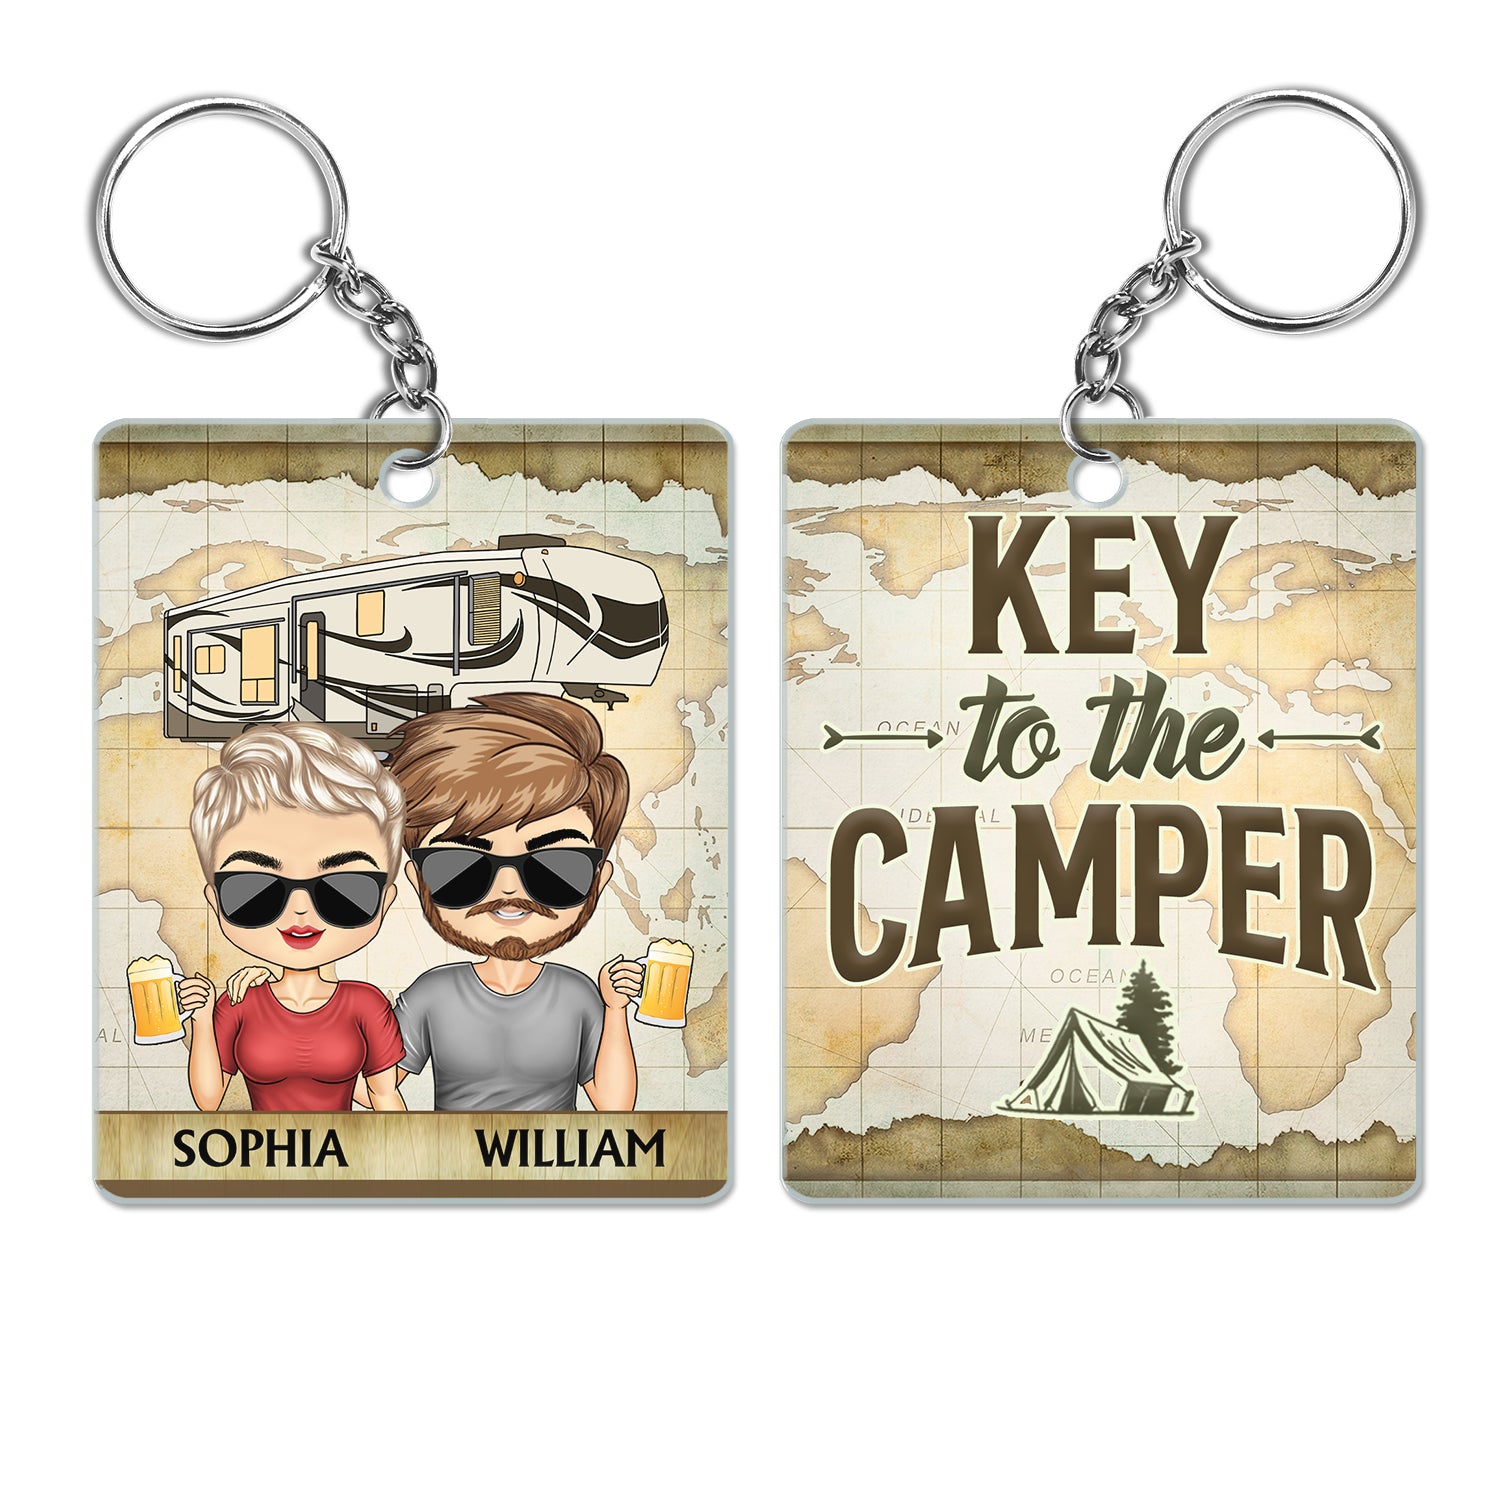 Drive Slow Drunk Camper Matter Key To The RVs - Birthday, Loving, Anniversary, Traveling Gift For Spouse, Husband, Wife, Camping Couple - Personalized Acrylic Keychain